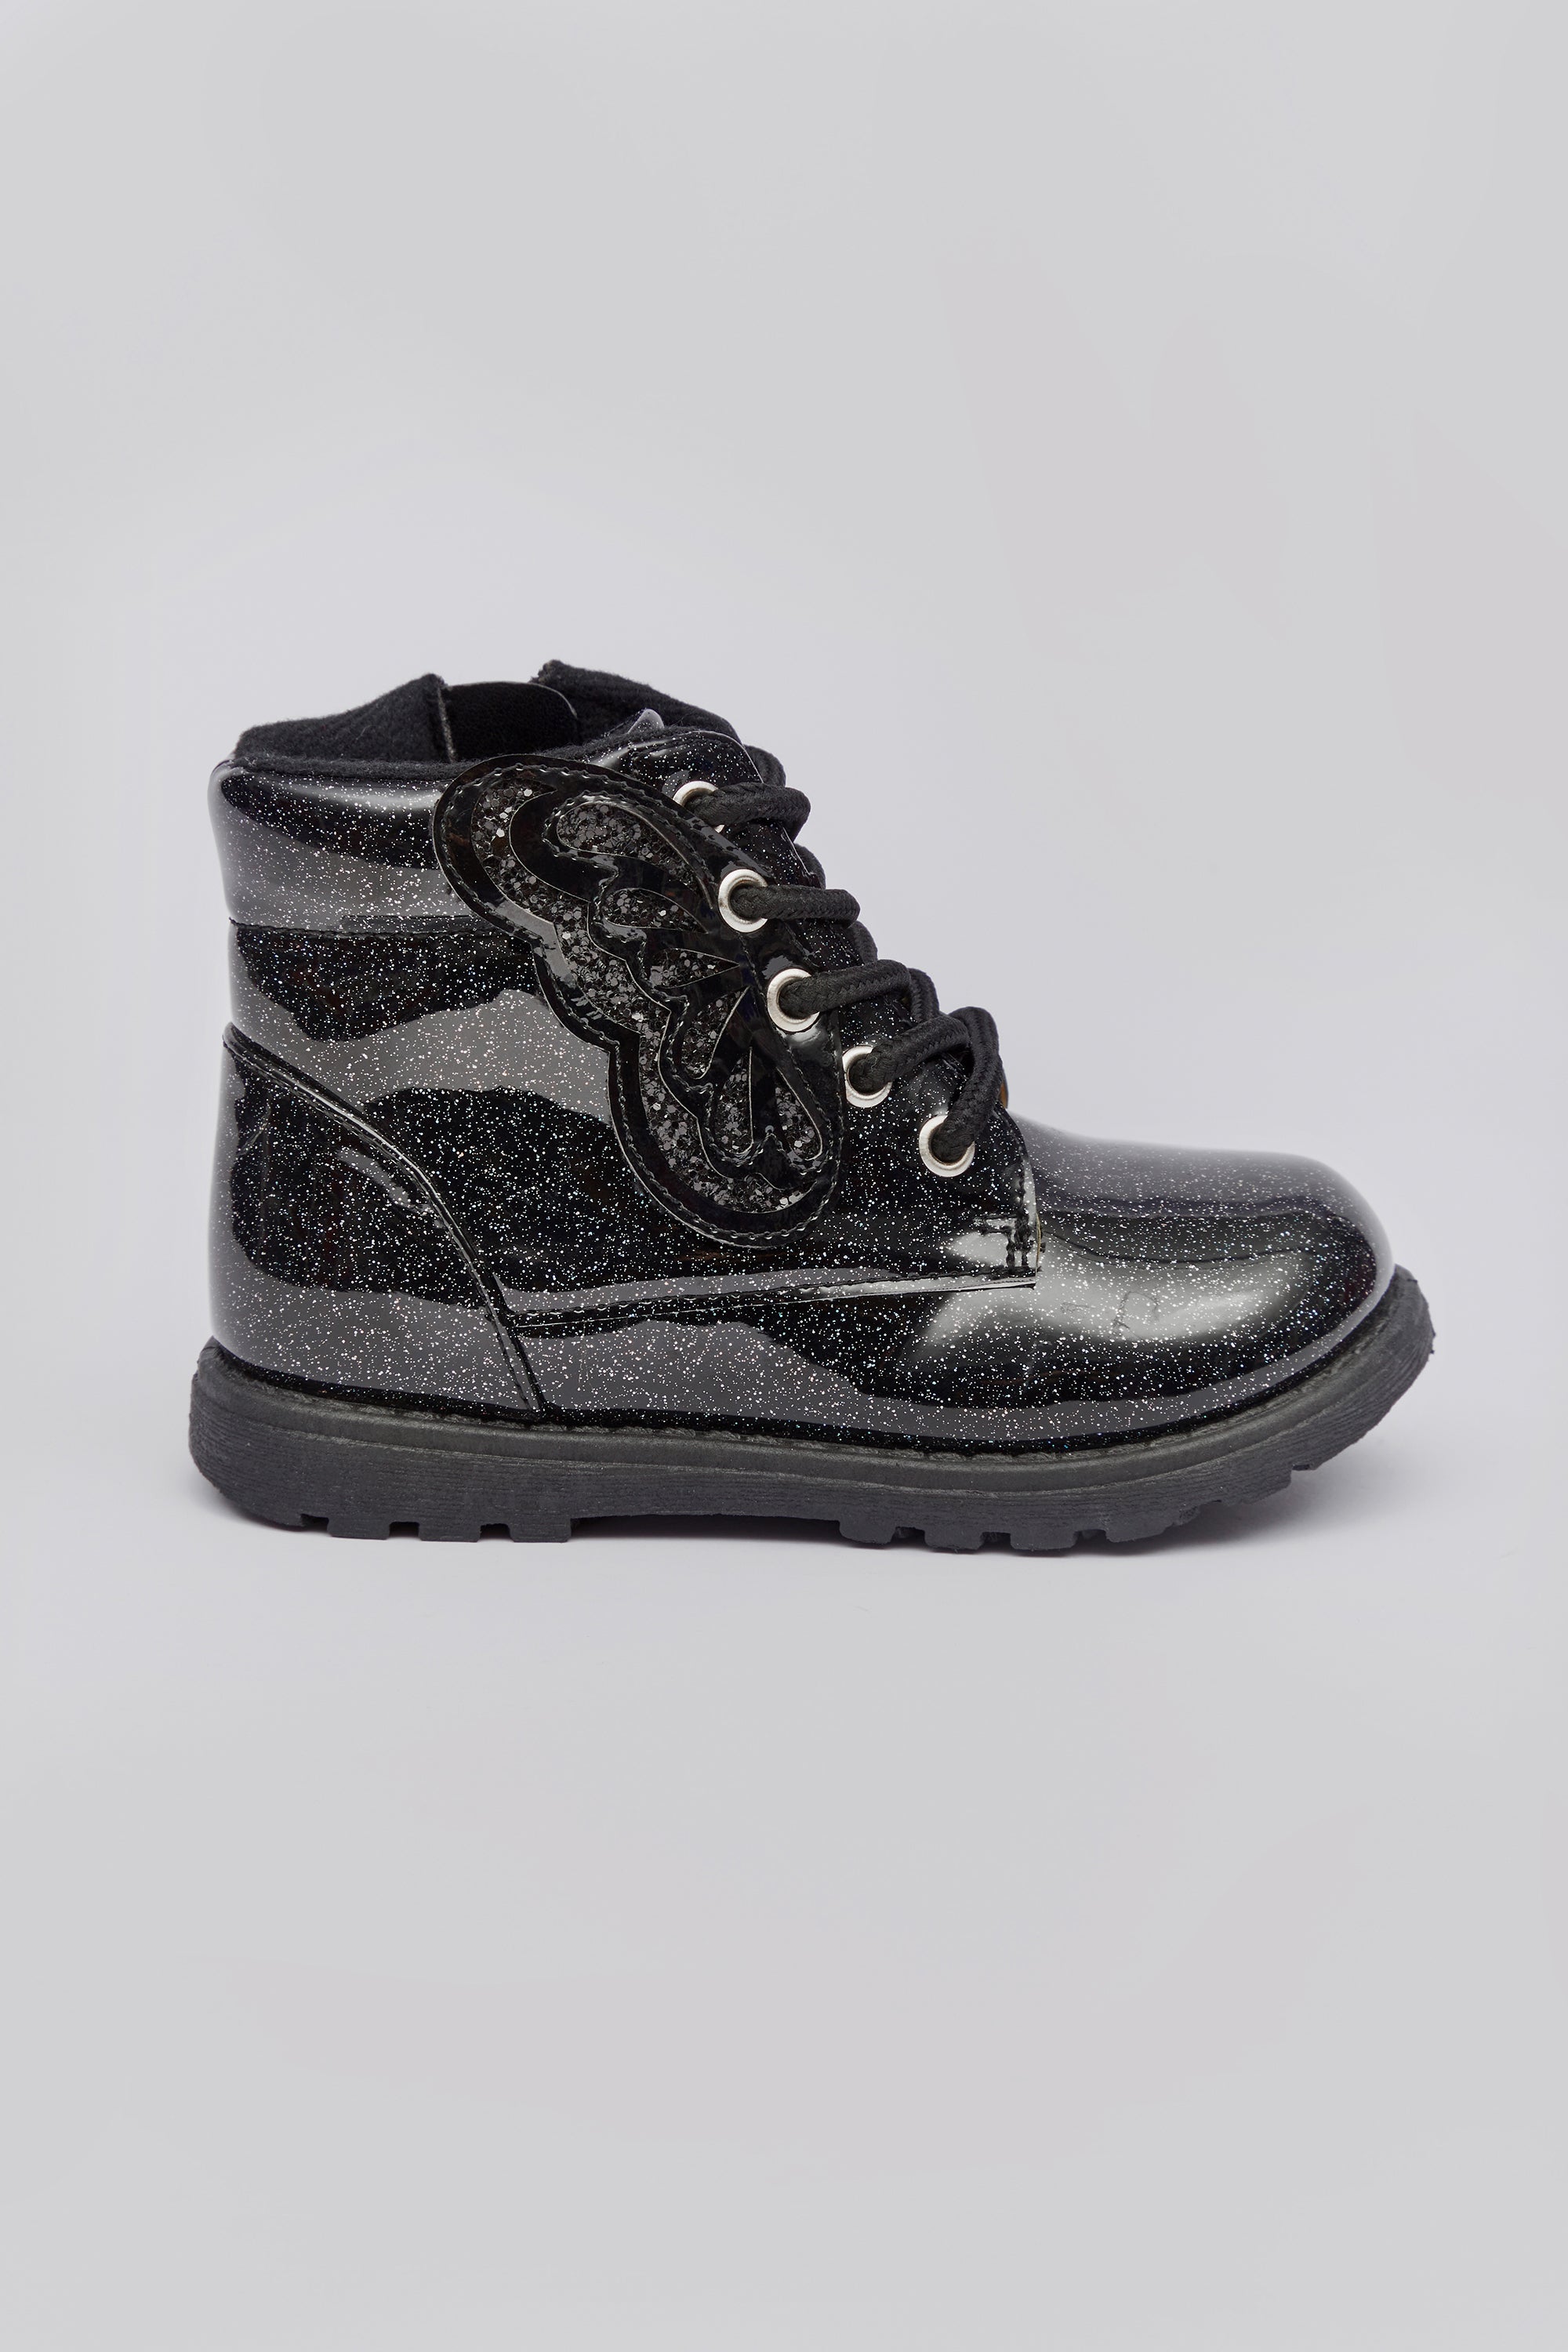 POLETA BUTTERFLY WING LACE UP BOOT